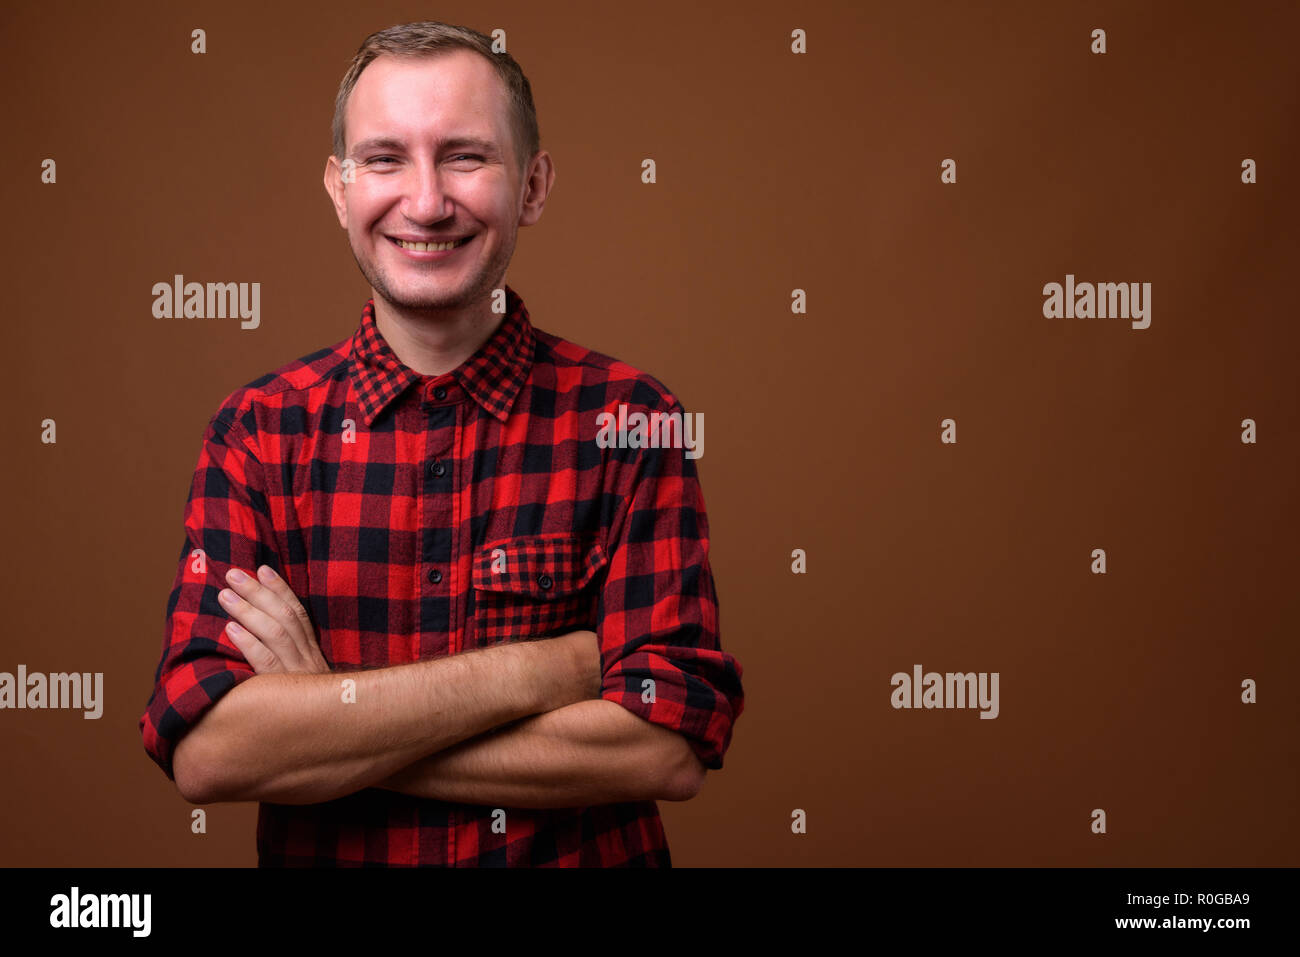 Studio shot of man against brown background Stock Photo